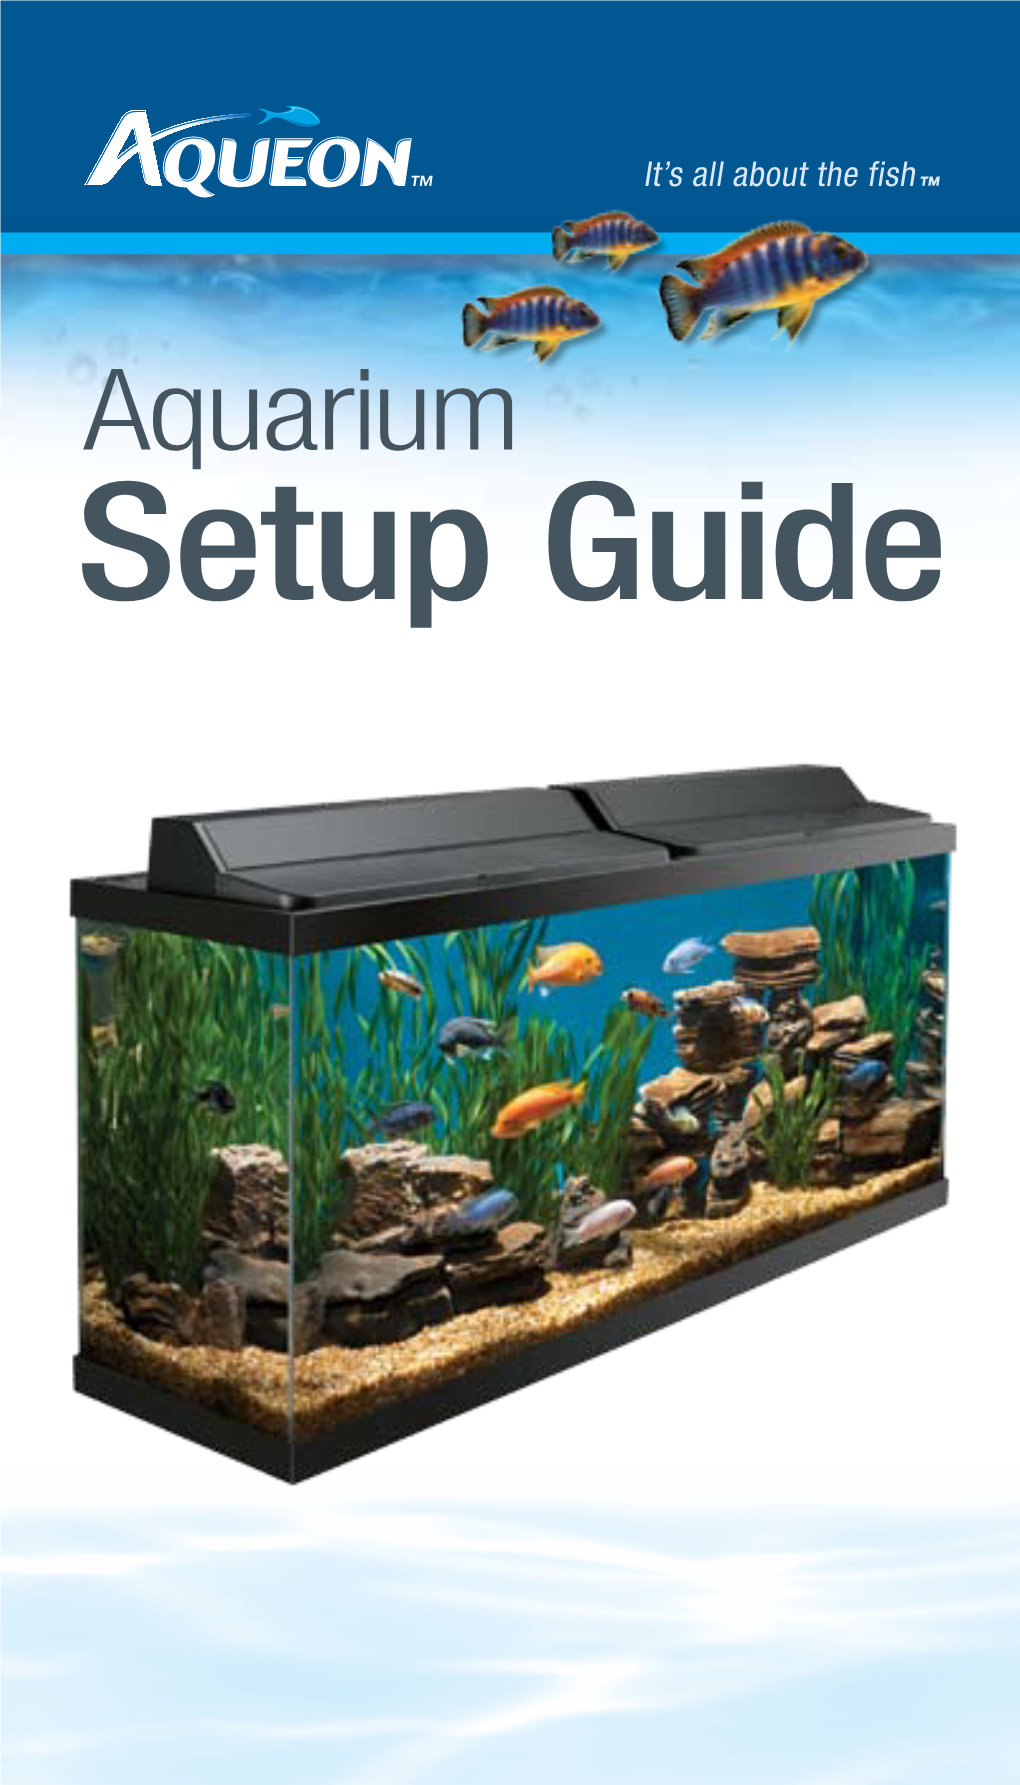 Setup Guide Aqueon Water Care Products Are Designed to Provide Effective Solutions to Aquarium Setup and Use